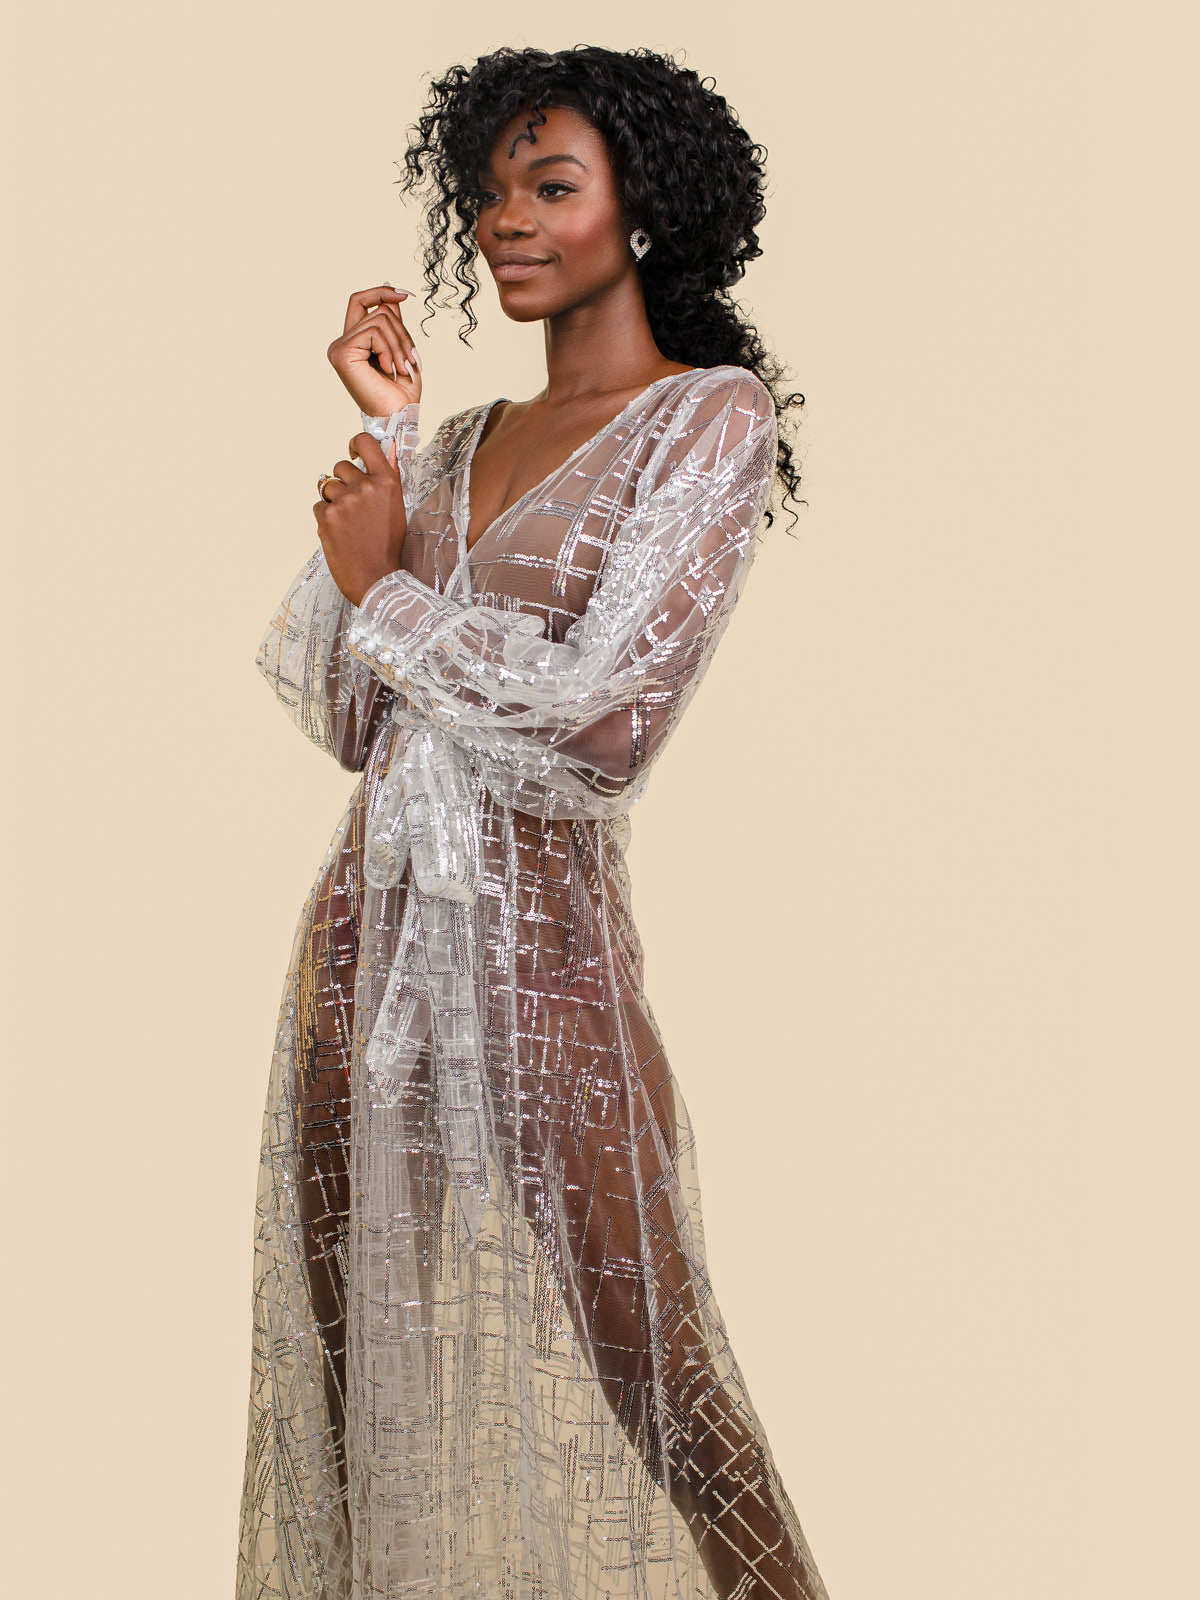 Black female model wearing long sheer glitter sparkle mesh robe with long sleeves and tie waist